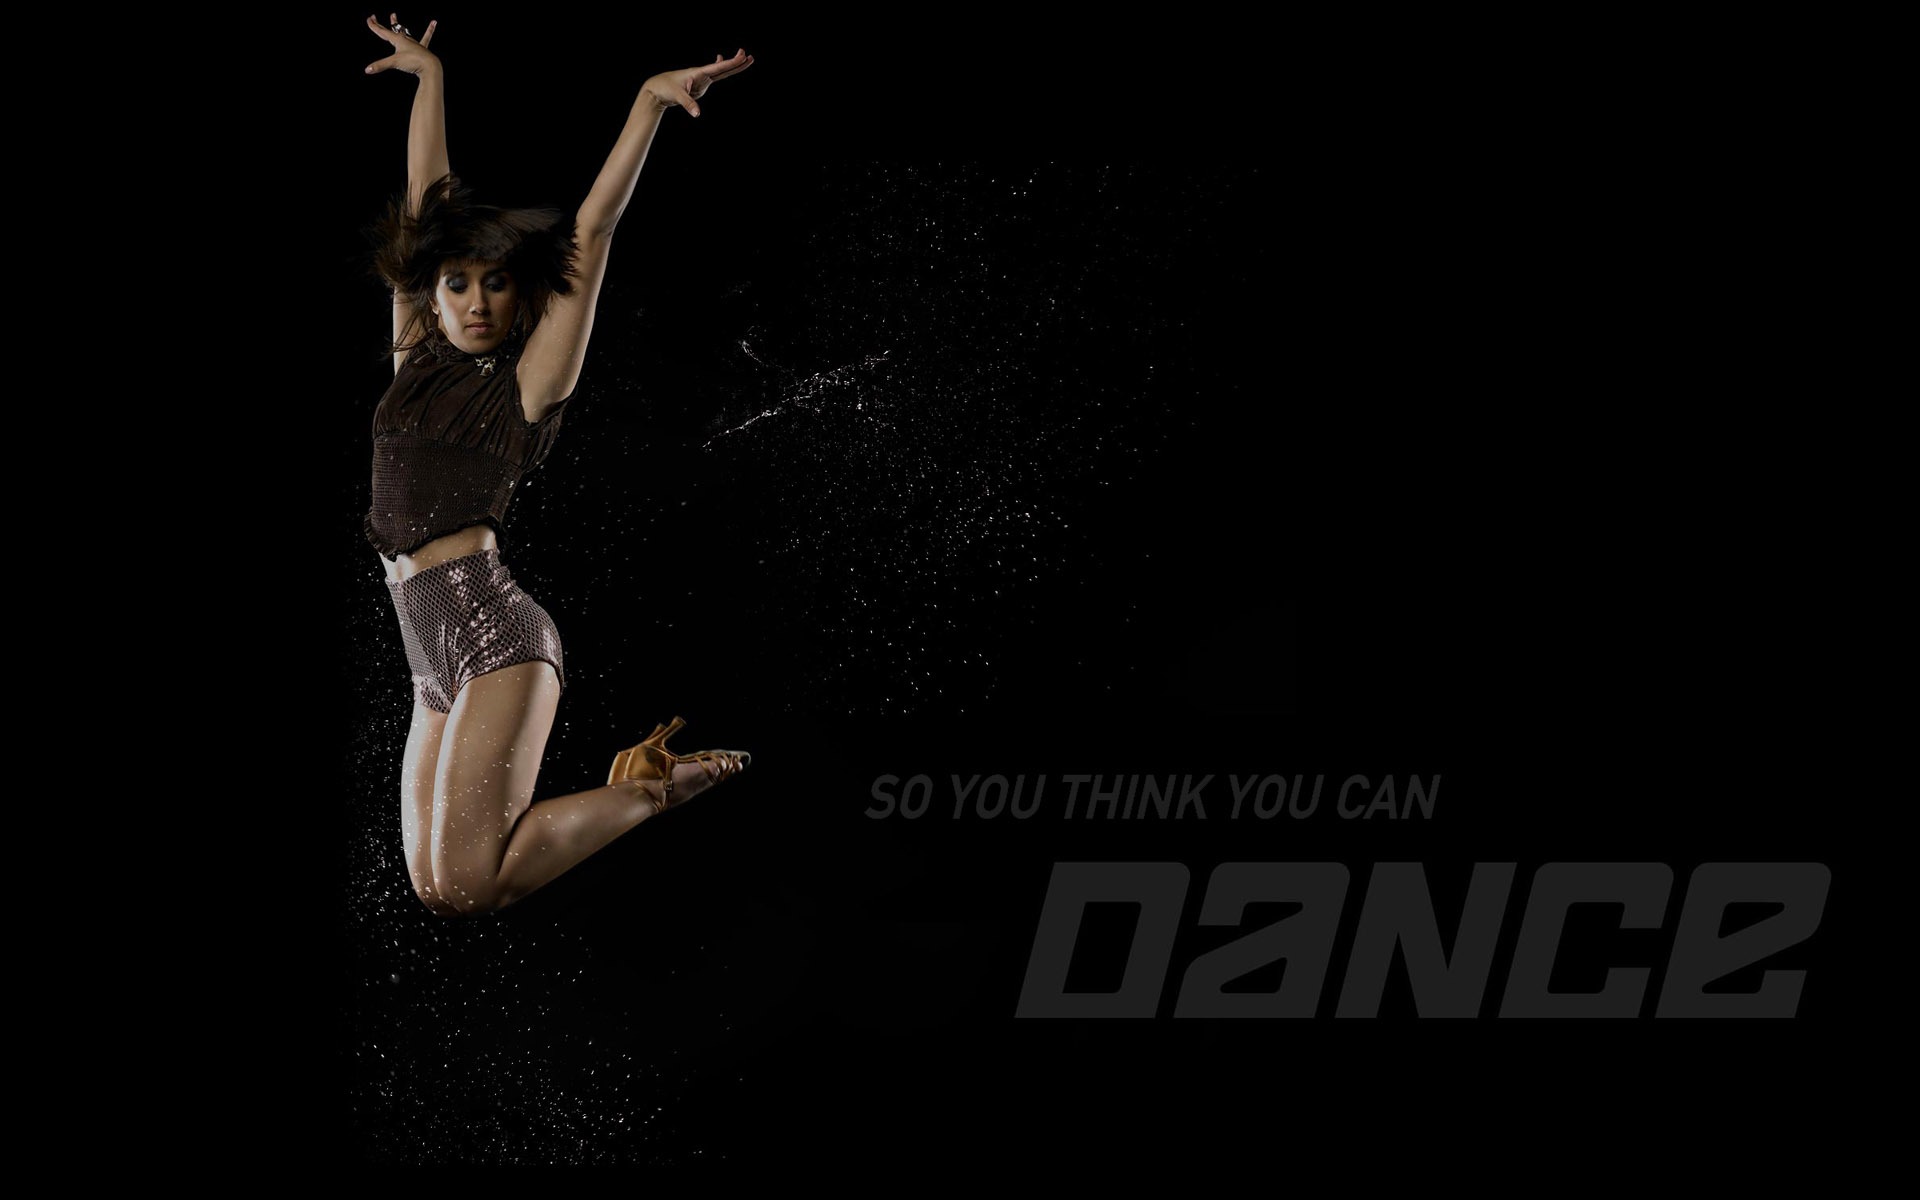 So You Think You Can Dance 舞林爭霸壁紙(一) #11 - 1920x1200